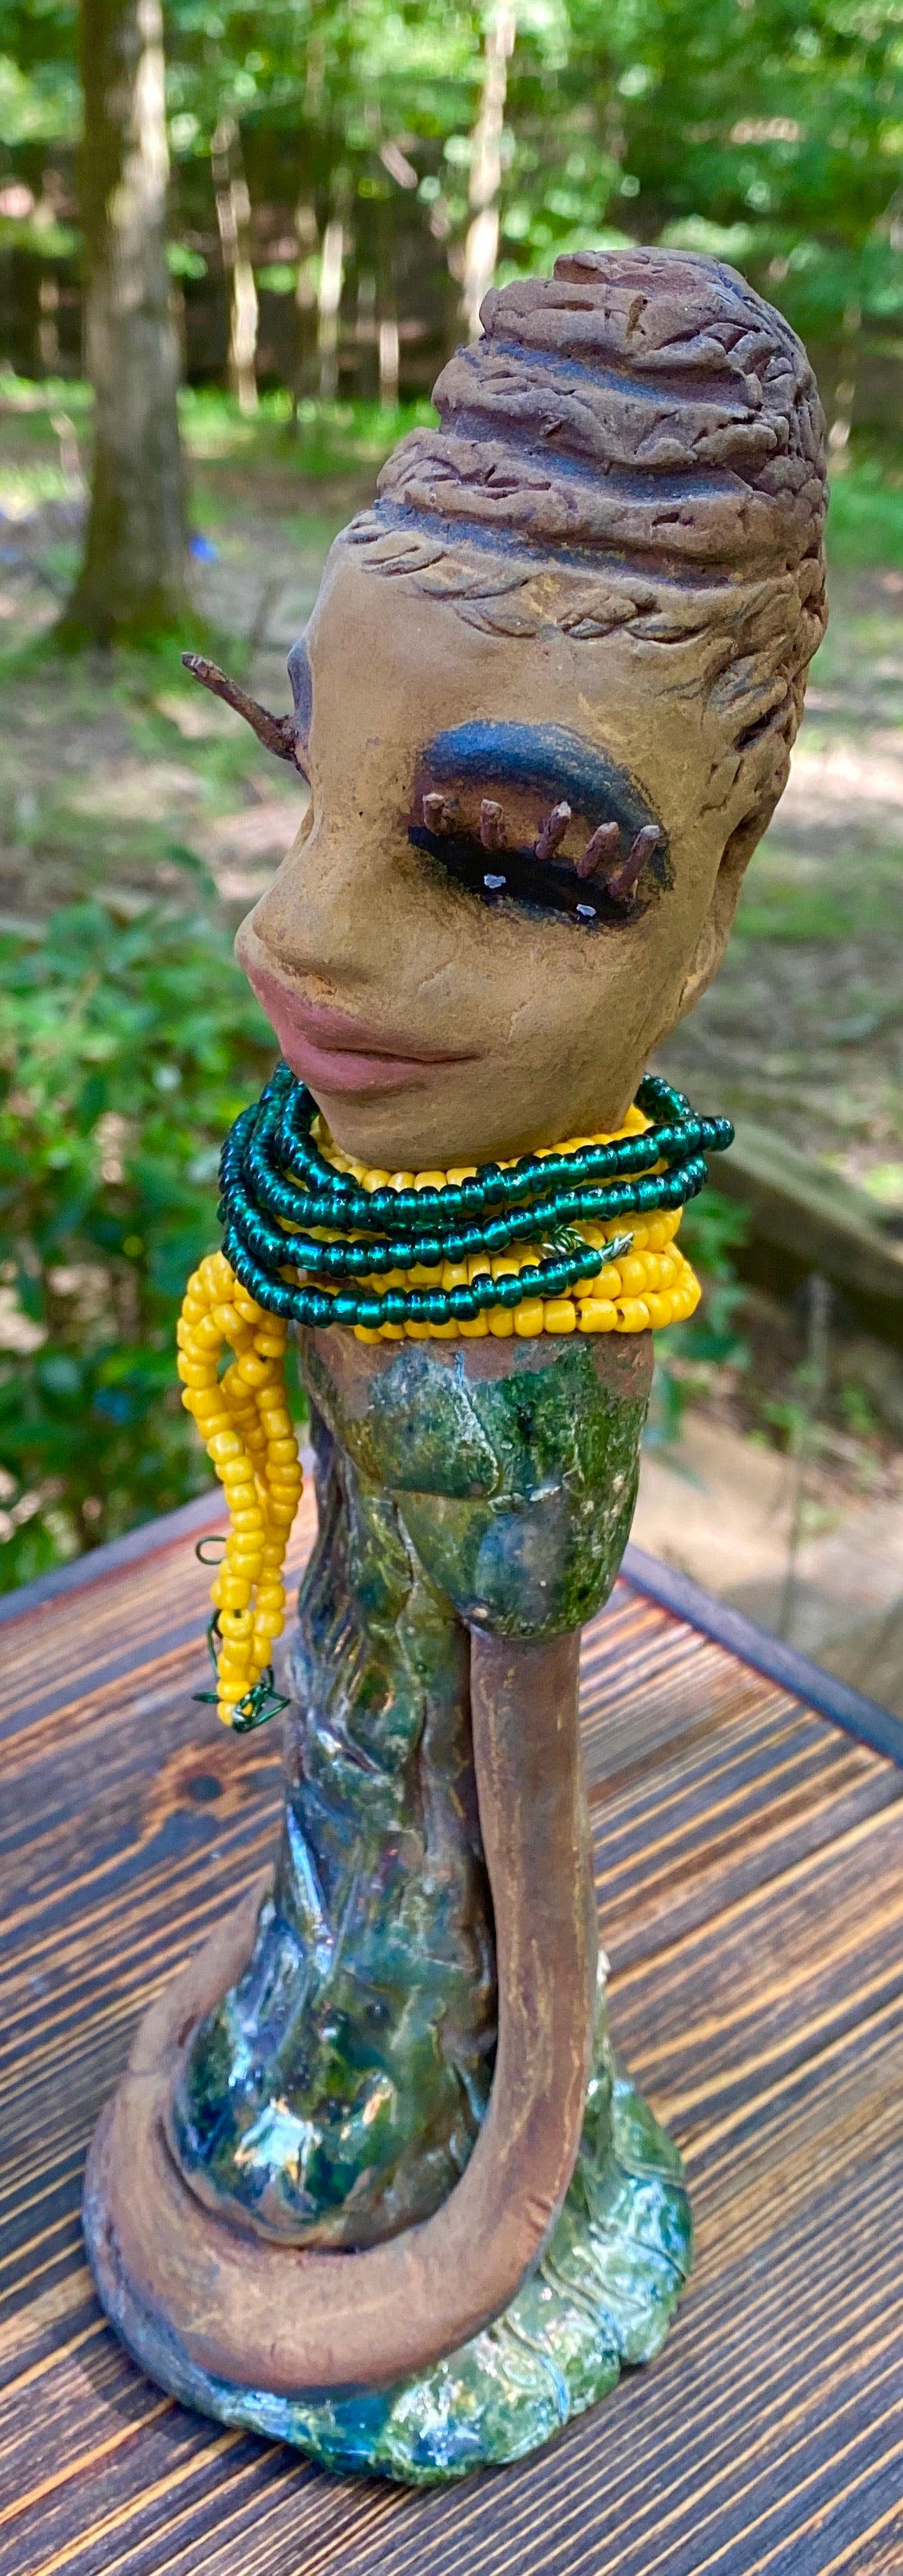 Meet Jazmyne! Jazmyne stands 11" x 4" x 4" and weighs 2.5 lbs. She has a lovely honey brown complexion with  reddish brown lips. She has a braided hairstyle.  Jazmyne has a colorful metallic green antique copper glazed dress. She wears a bright yellow beaded necklace. With long lashes and eyes wide opened, Jazmyne has hopes of finding a new home.    Jazmyne  will attract and spark conversation with guest in your home!